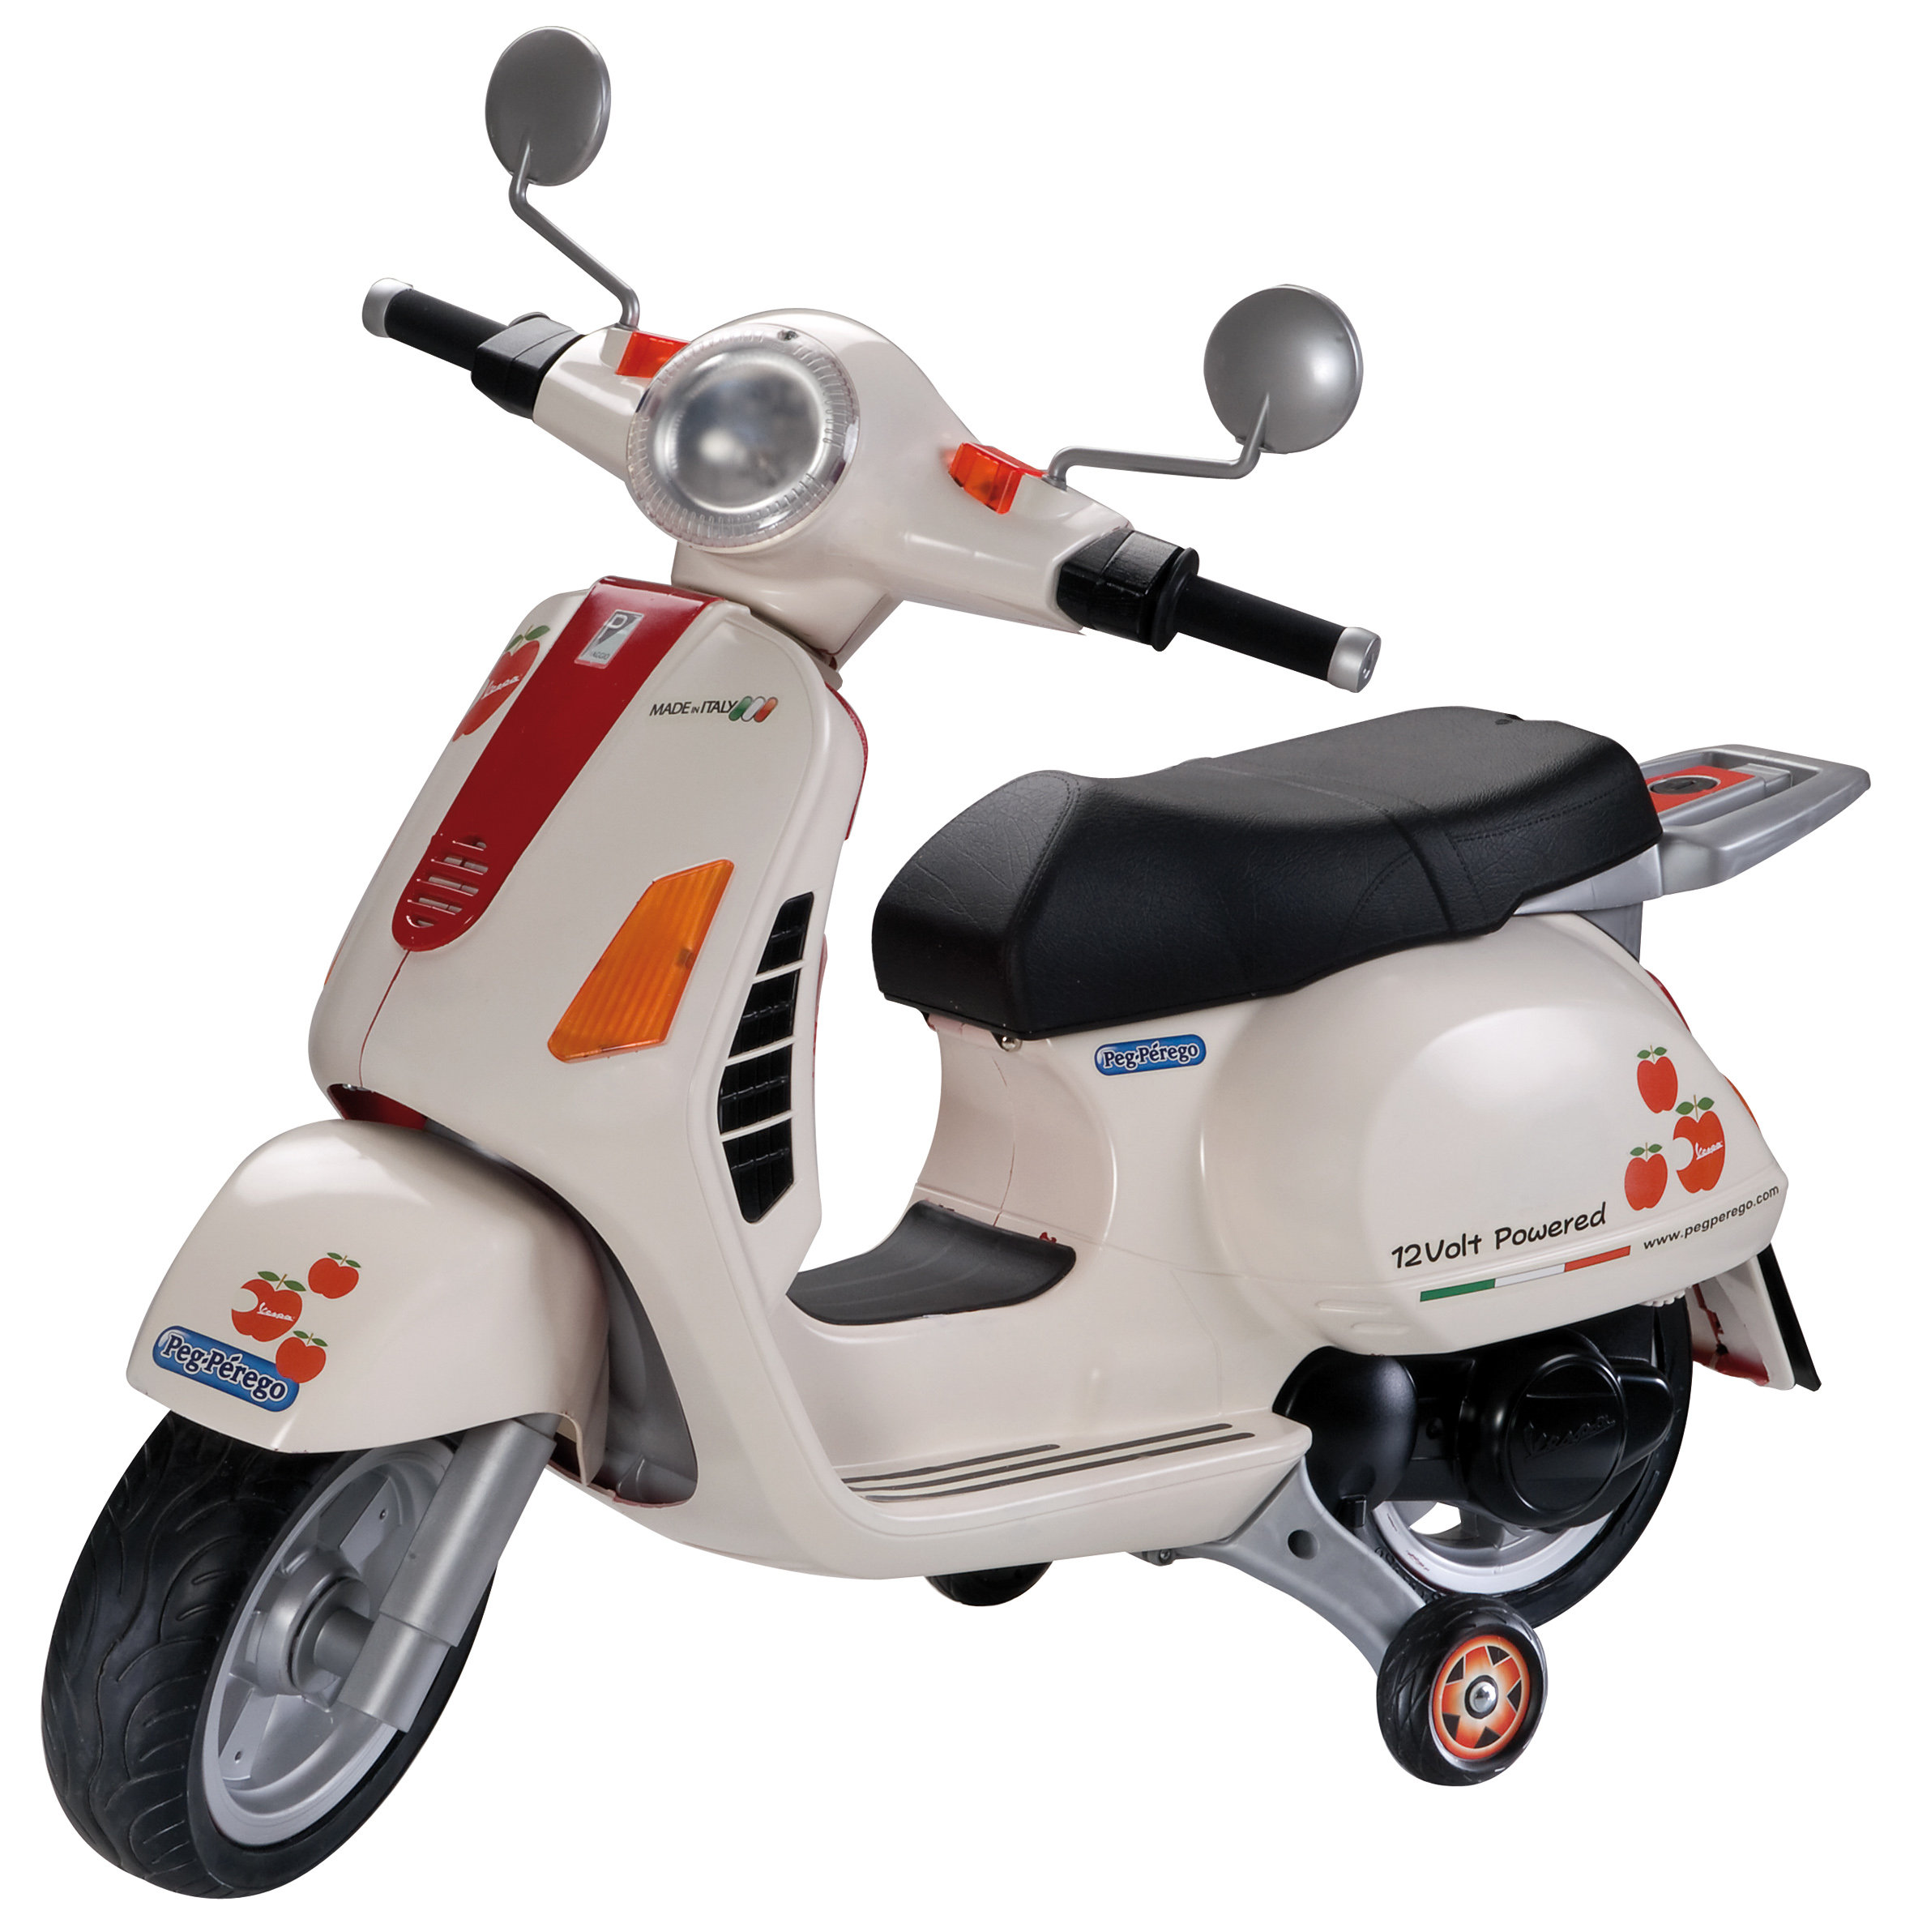 Piaggio NGR Power DT 2008 #13